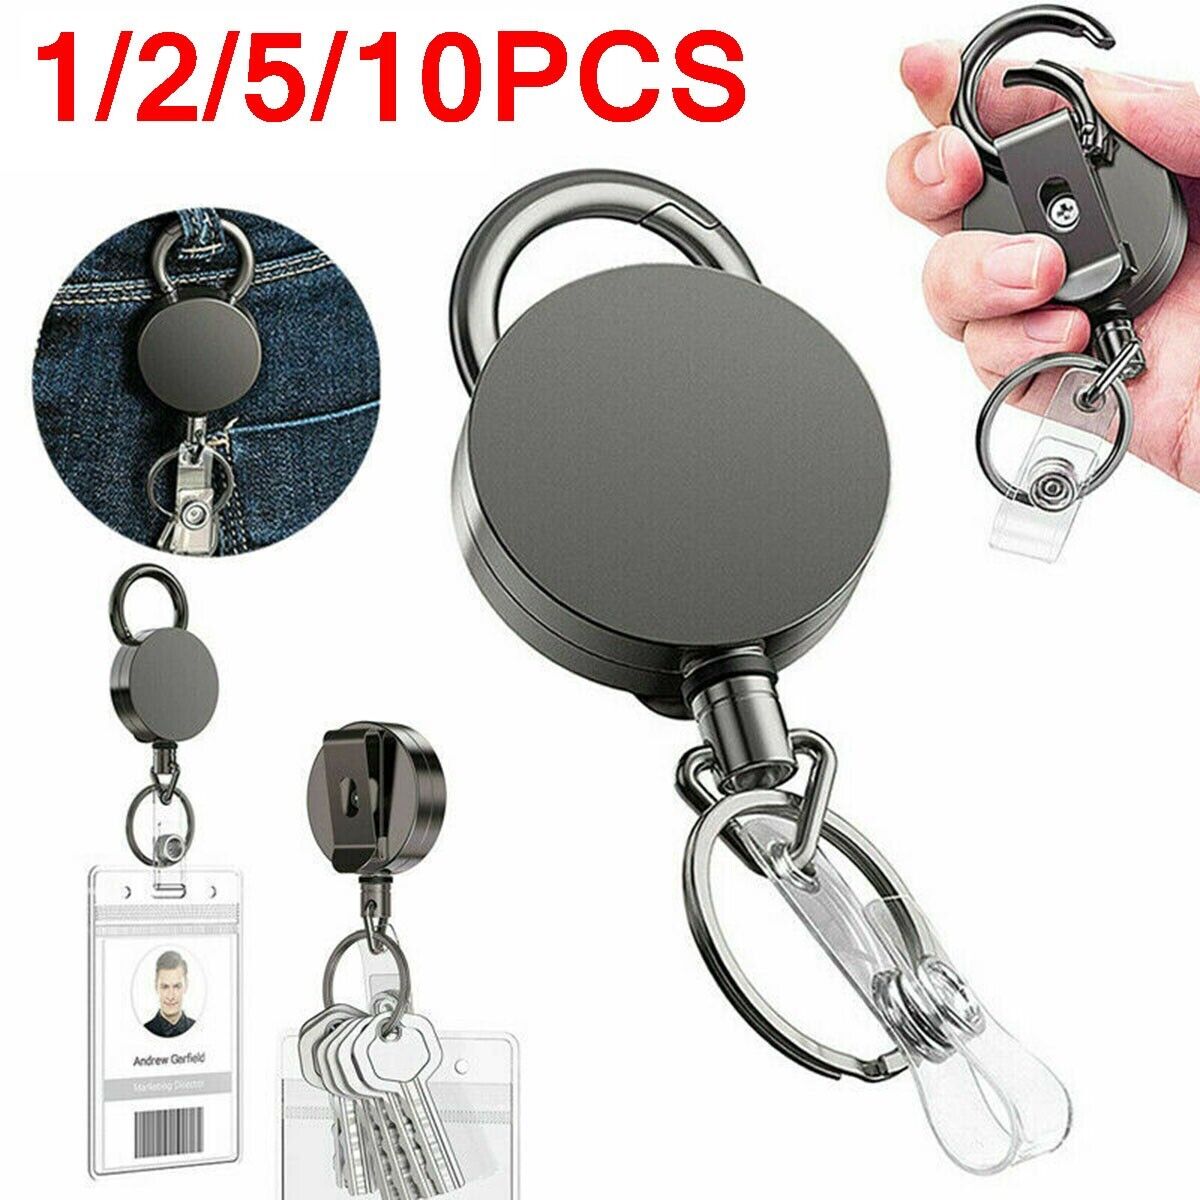 Retractable Heavy Duty Pull Ring Key Chain Recoil Keyring Wire Rope Key Holder